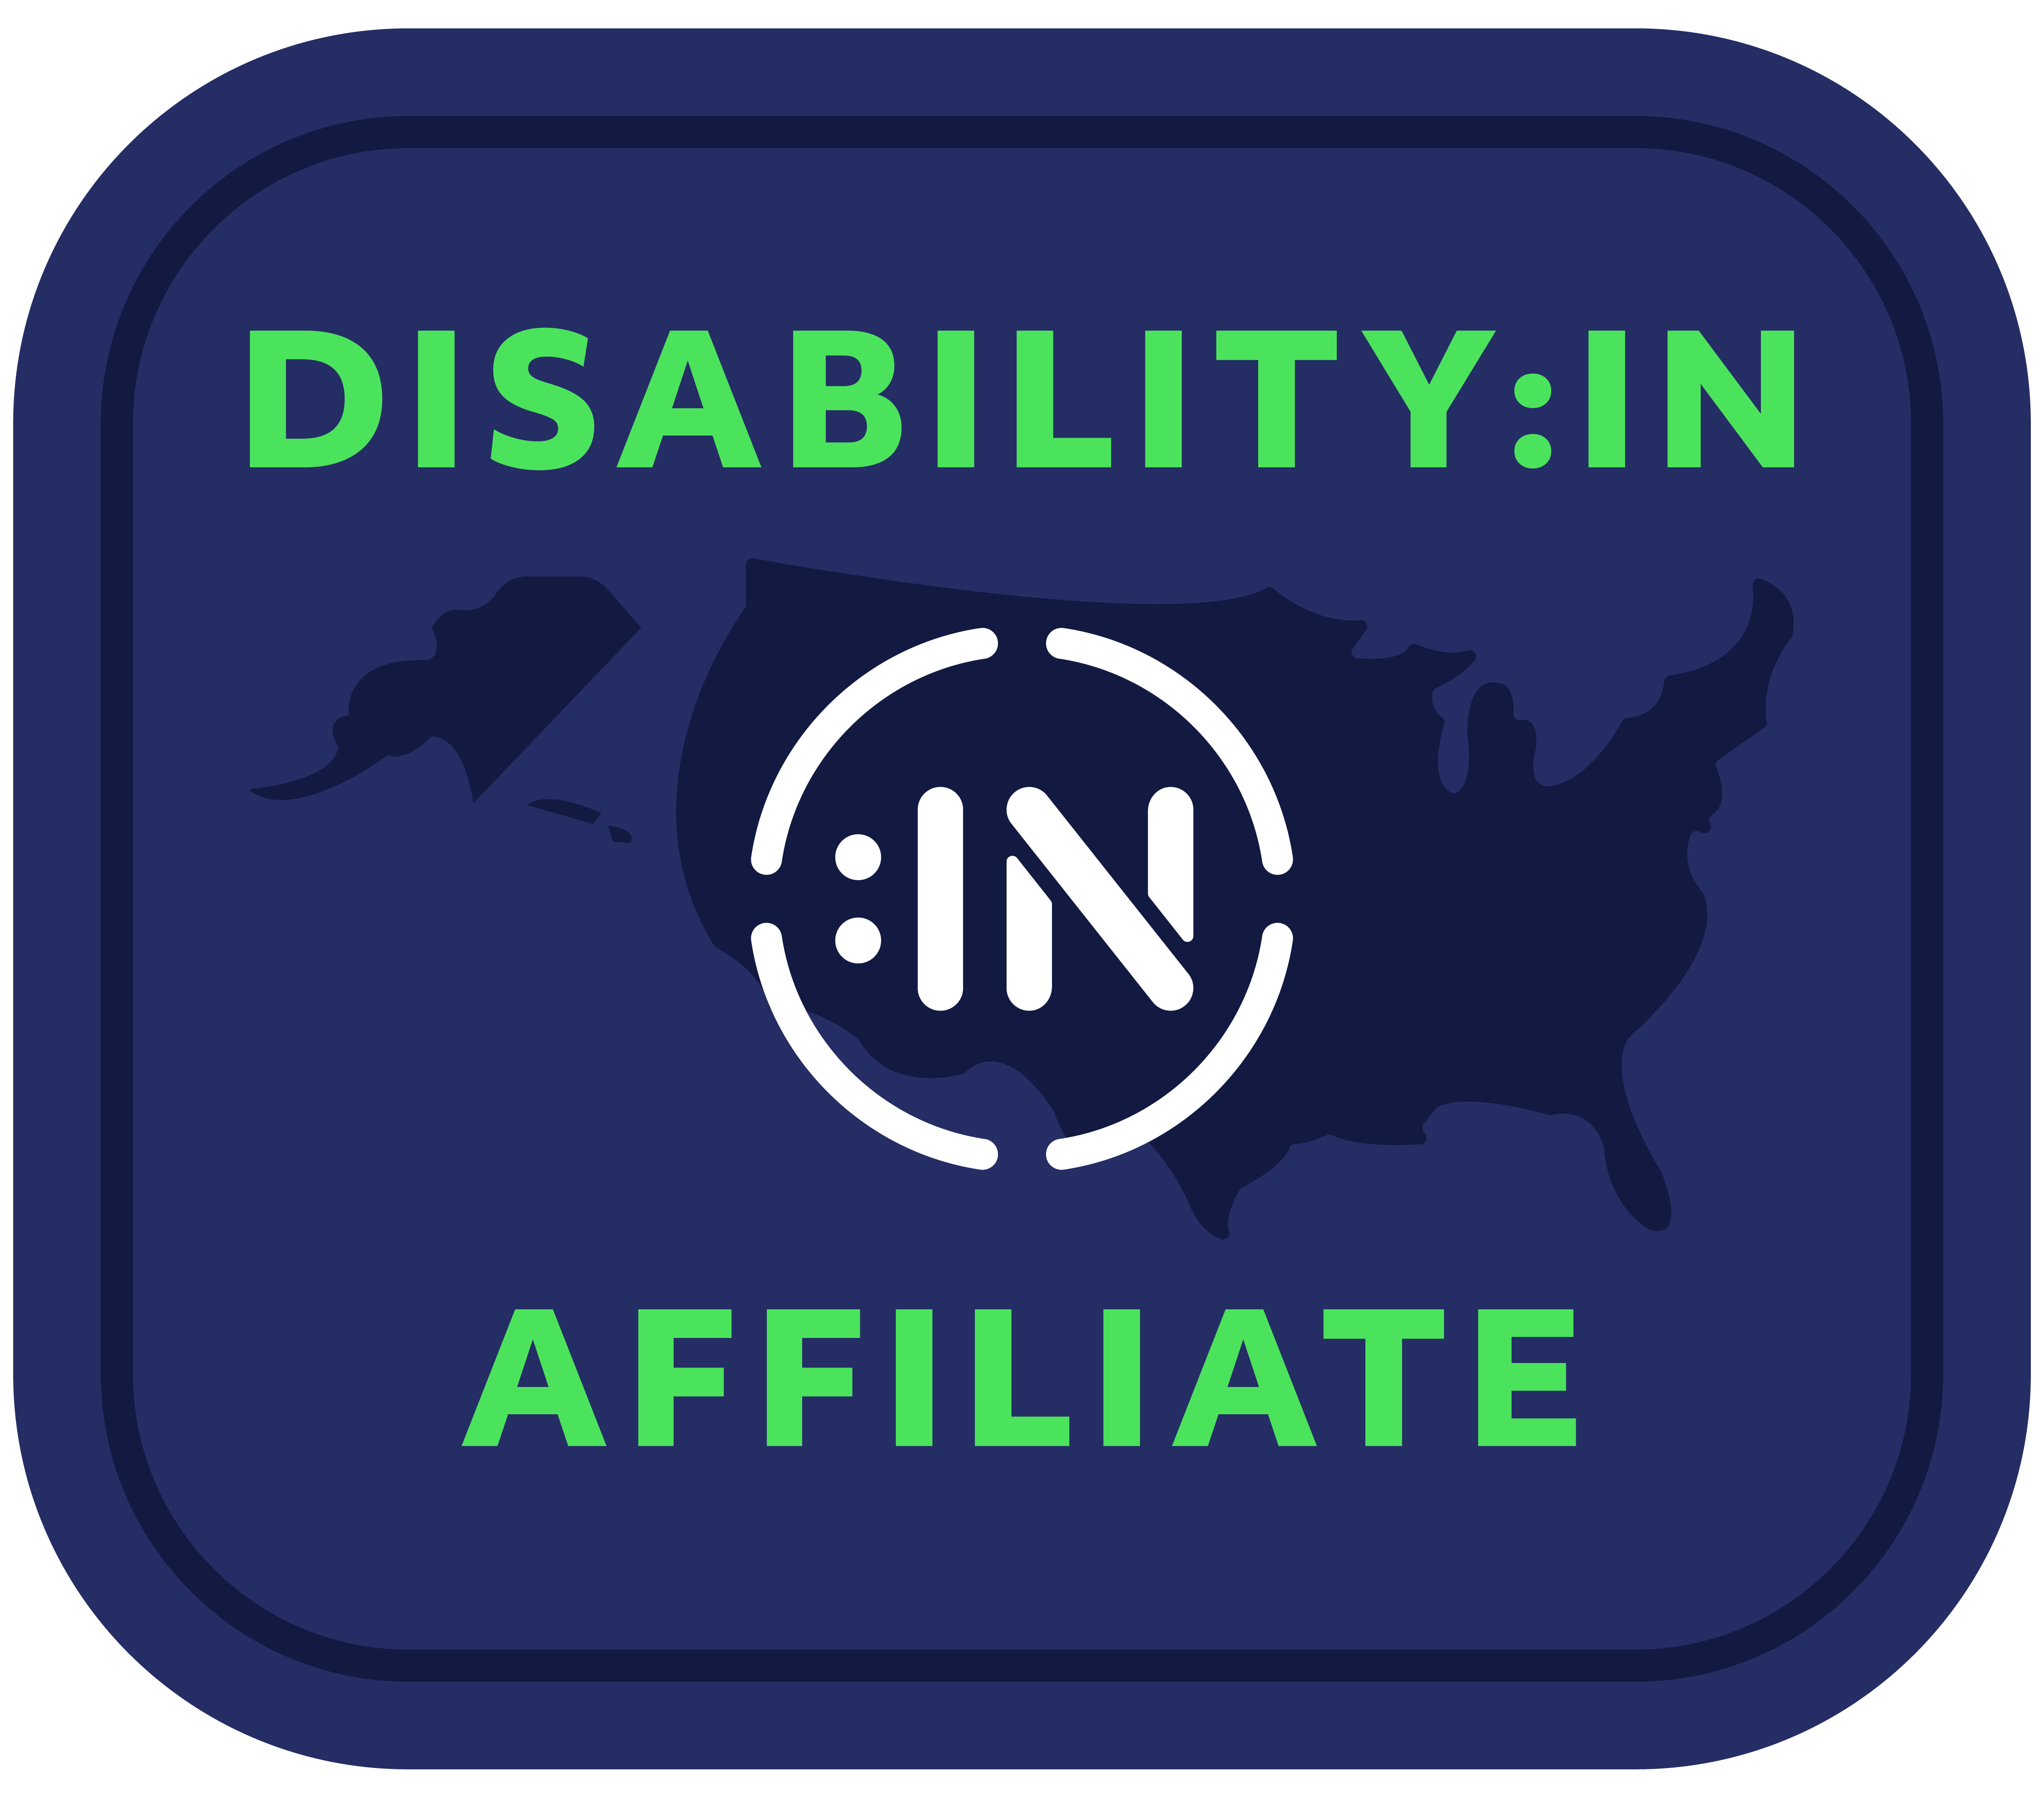 Affliliate Badge for Disability:IN 